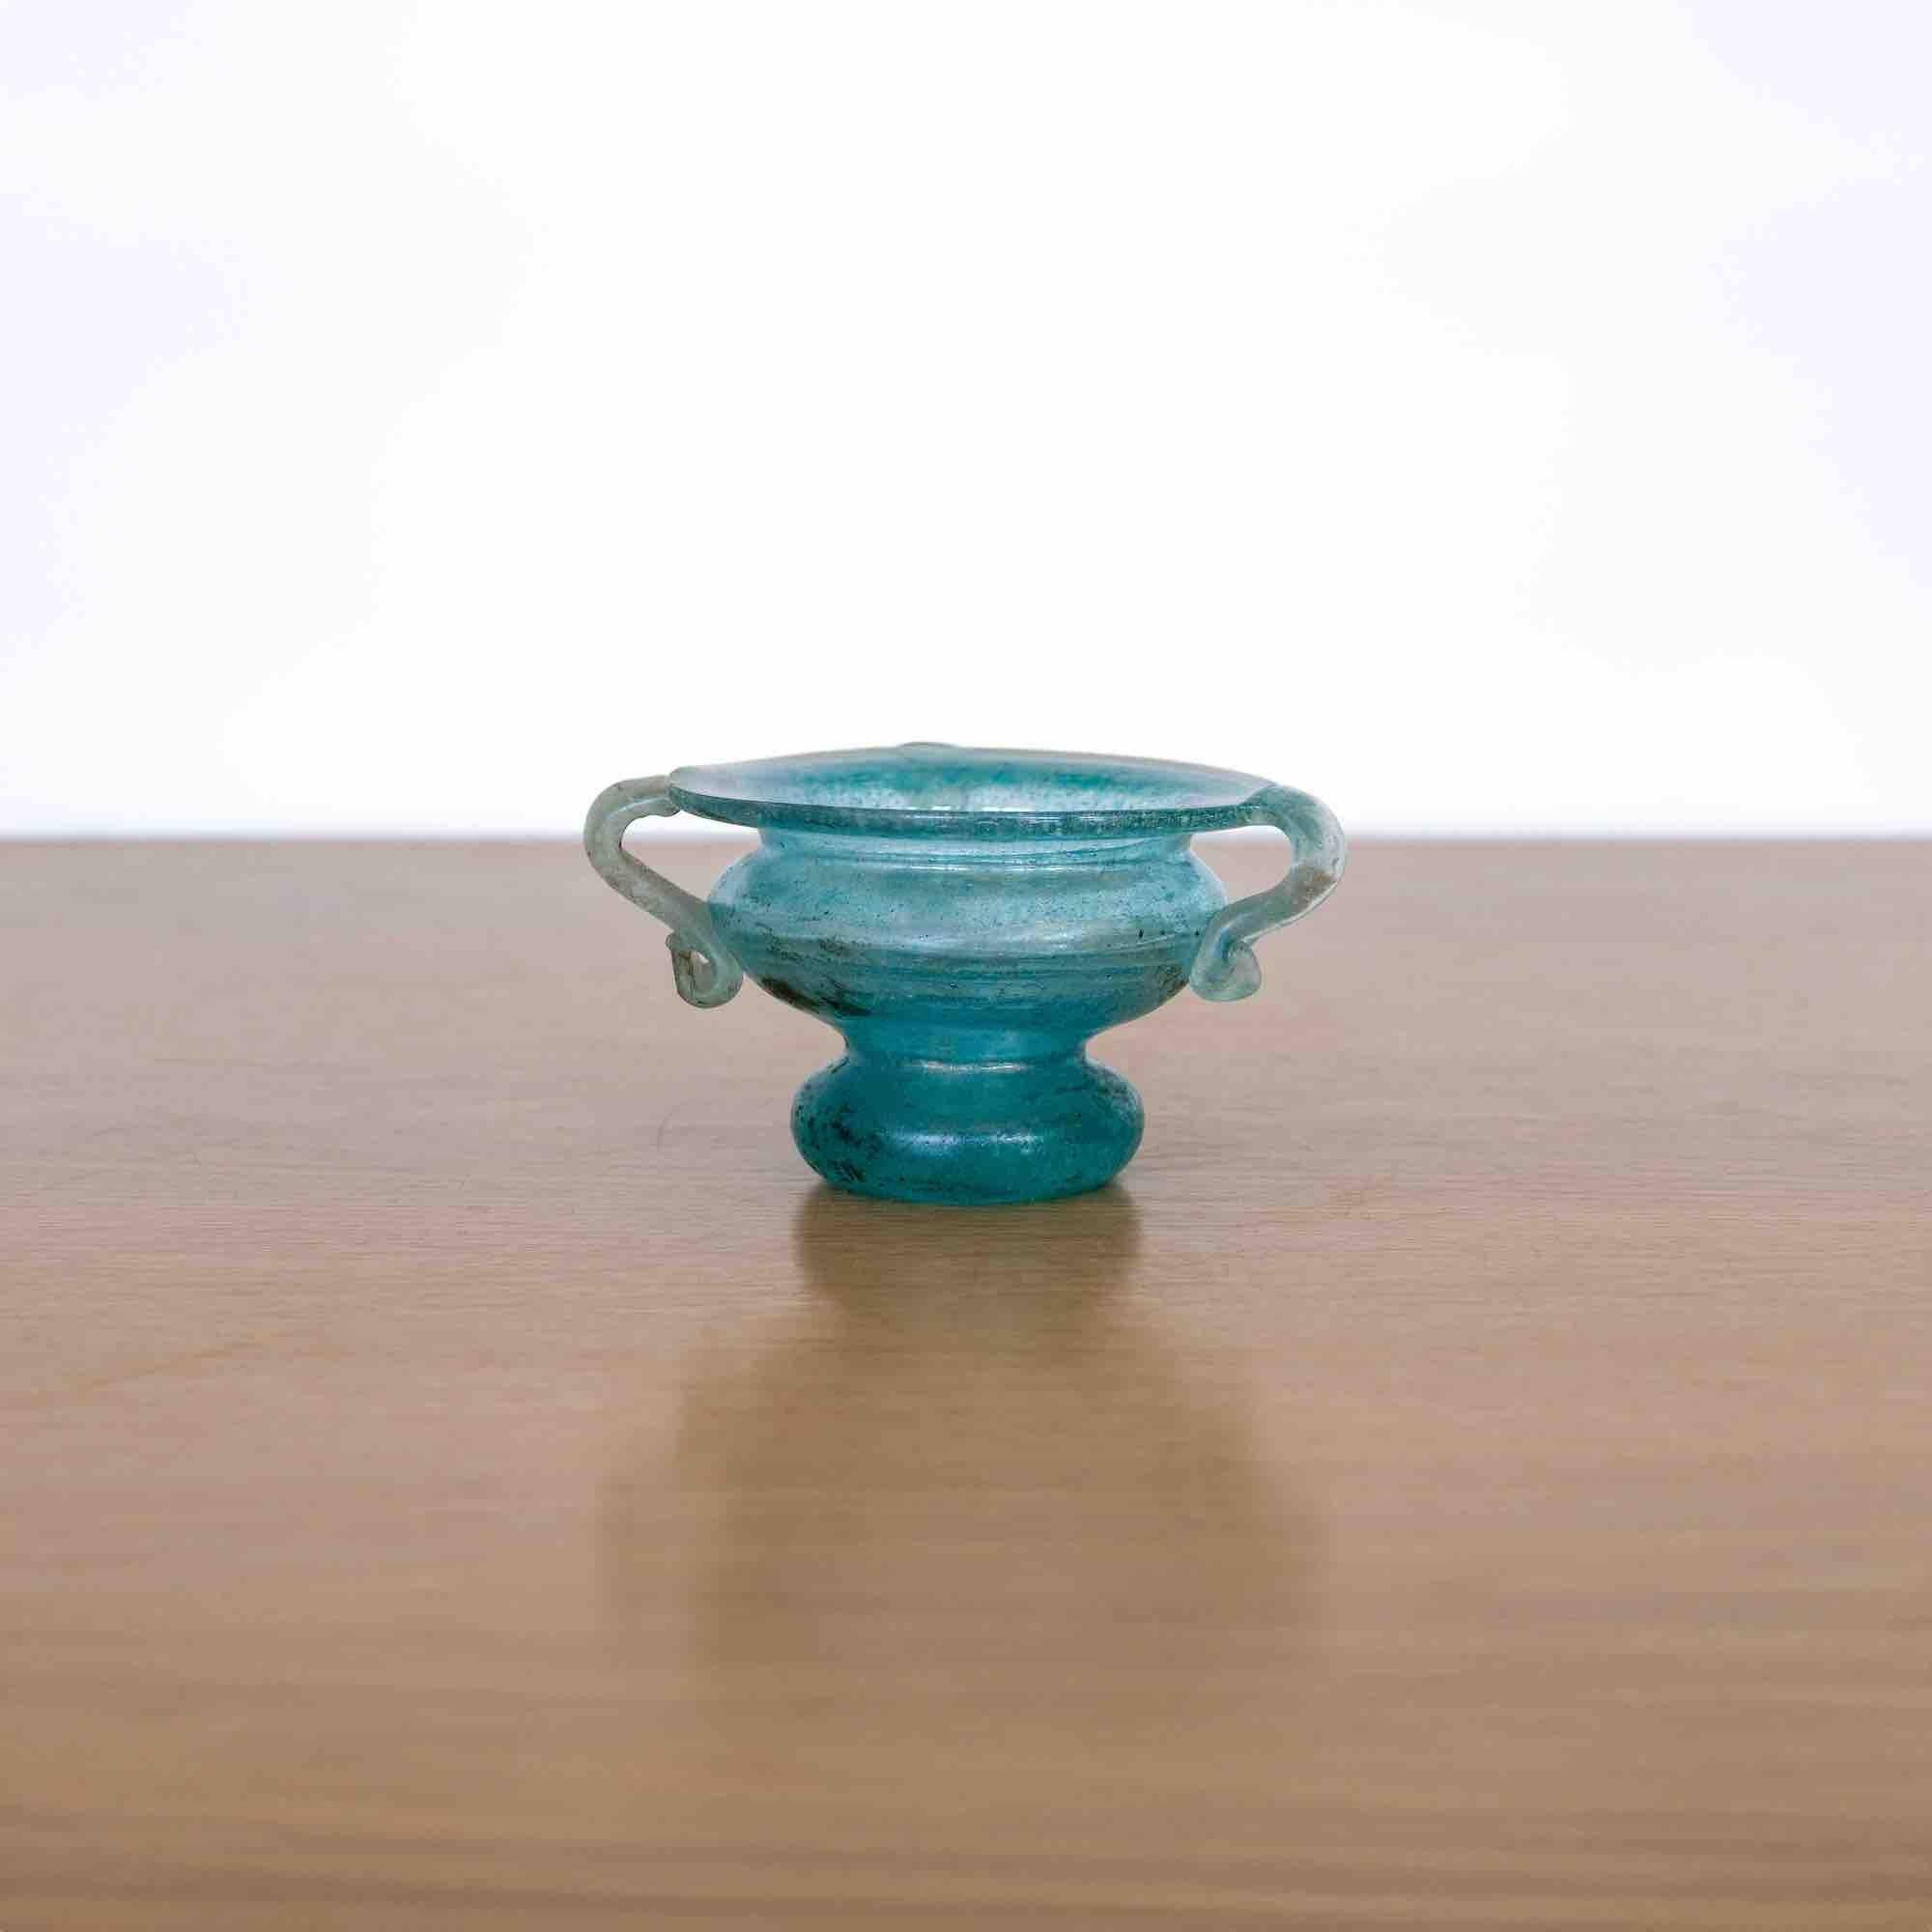 Beautiful vintage petite Italian Scavo vase from Italy. Frosted blue glass with three handles. Perfect as a catch-all or decorative piece. 